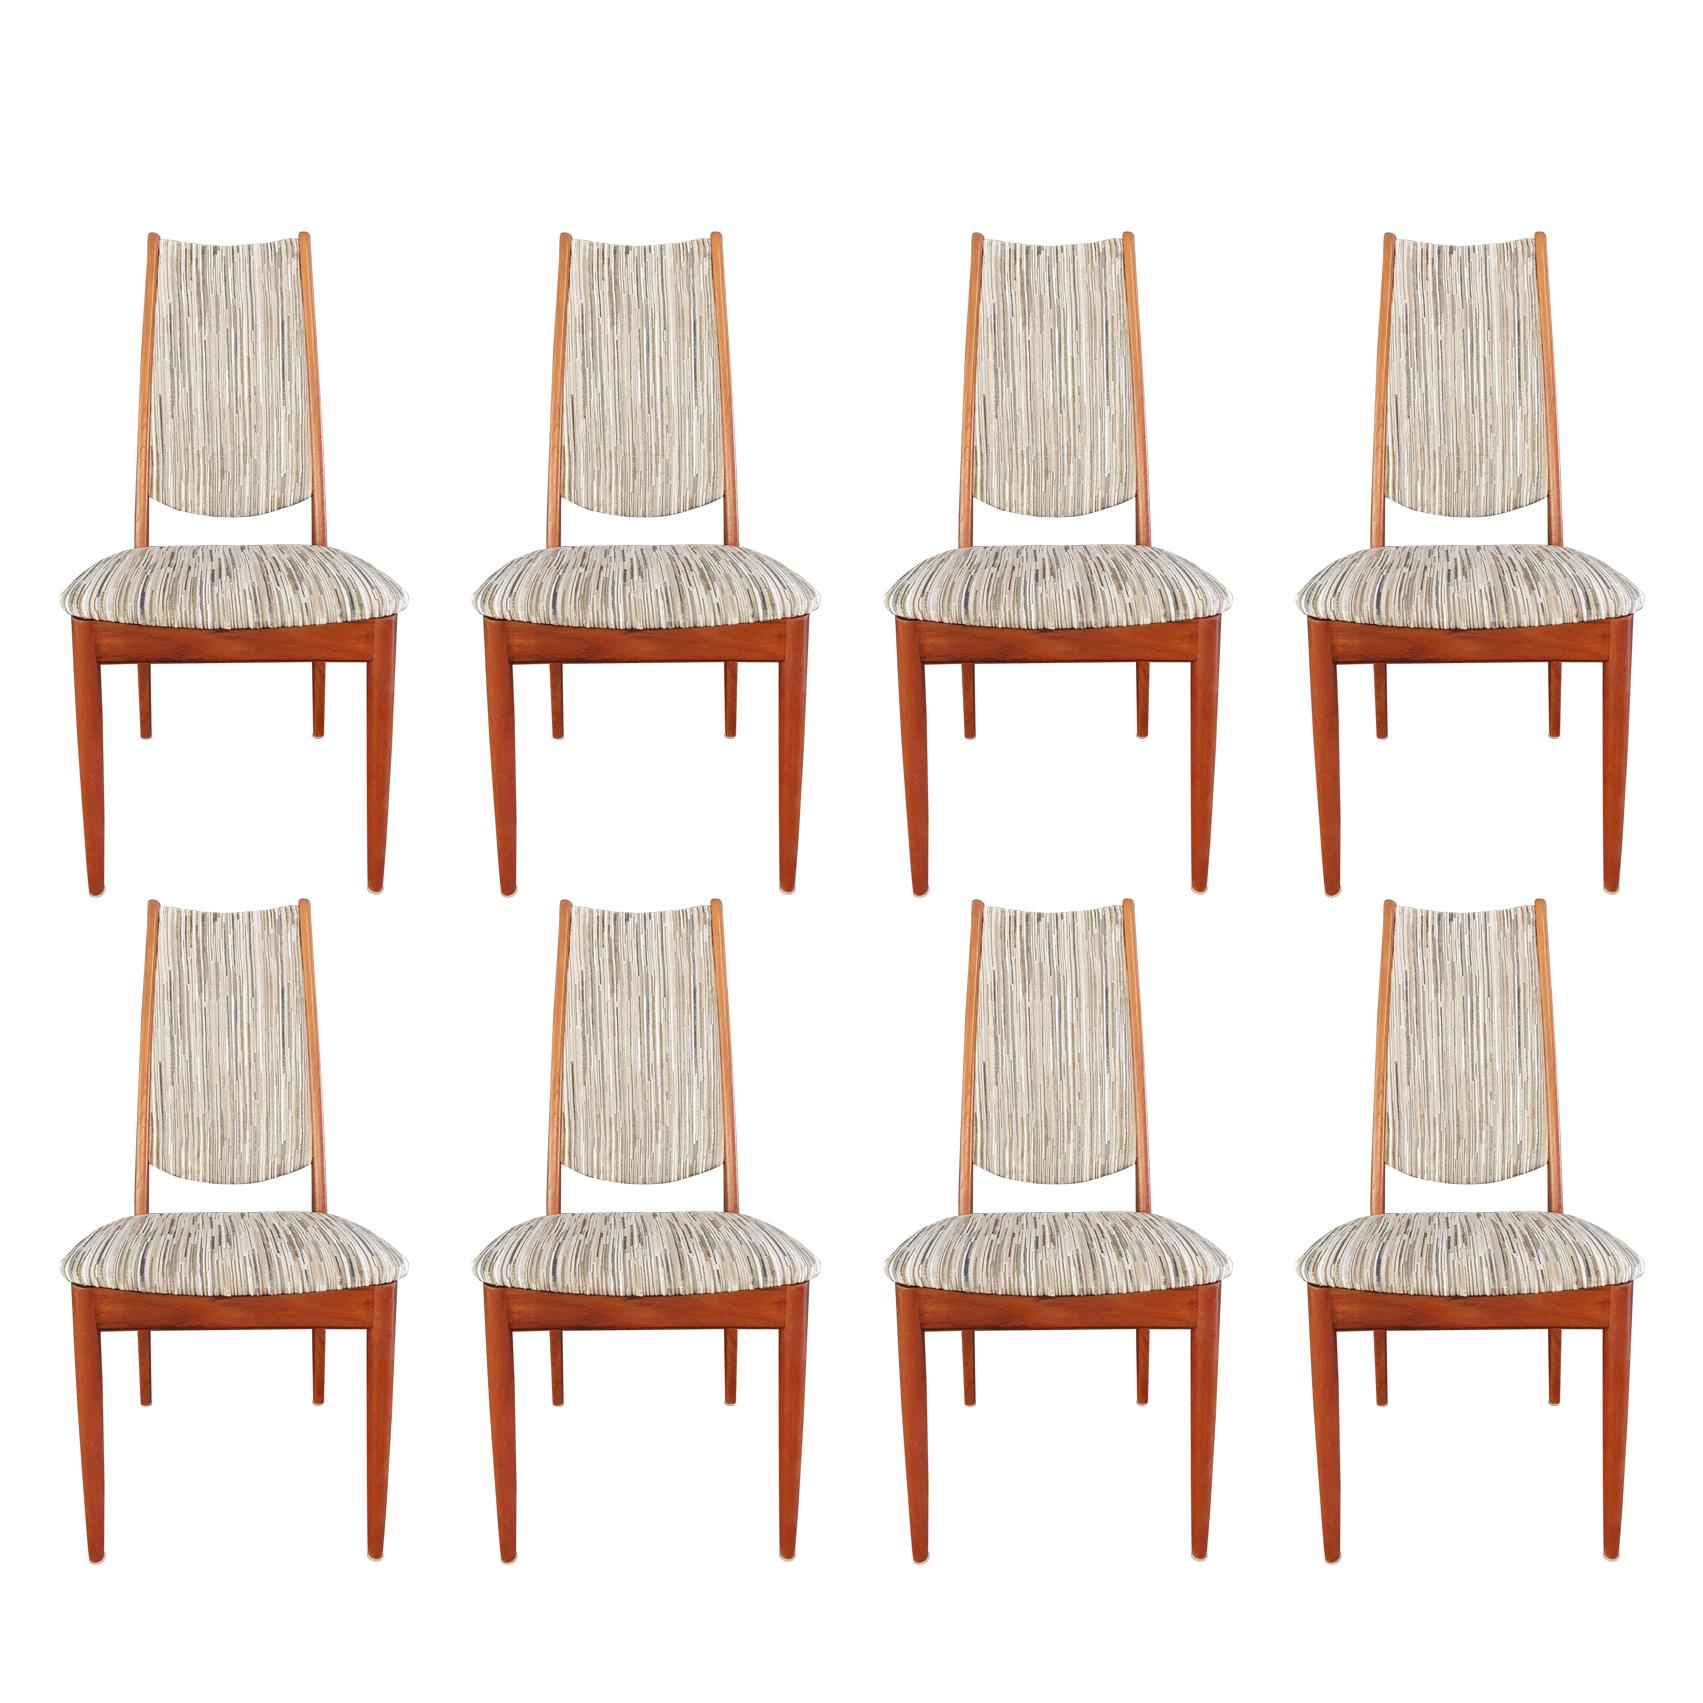 Mid-Century Modern Set of 8 Teak Dining Chairs Attributed to Johannes Andersen